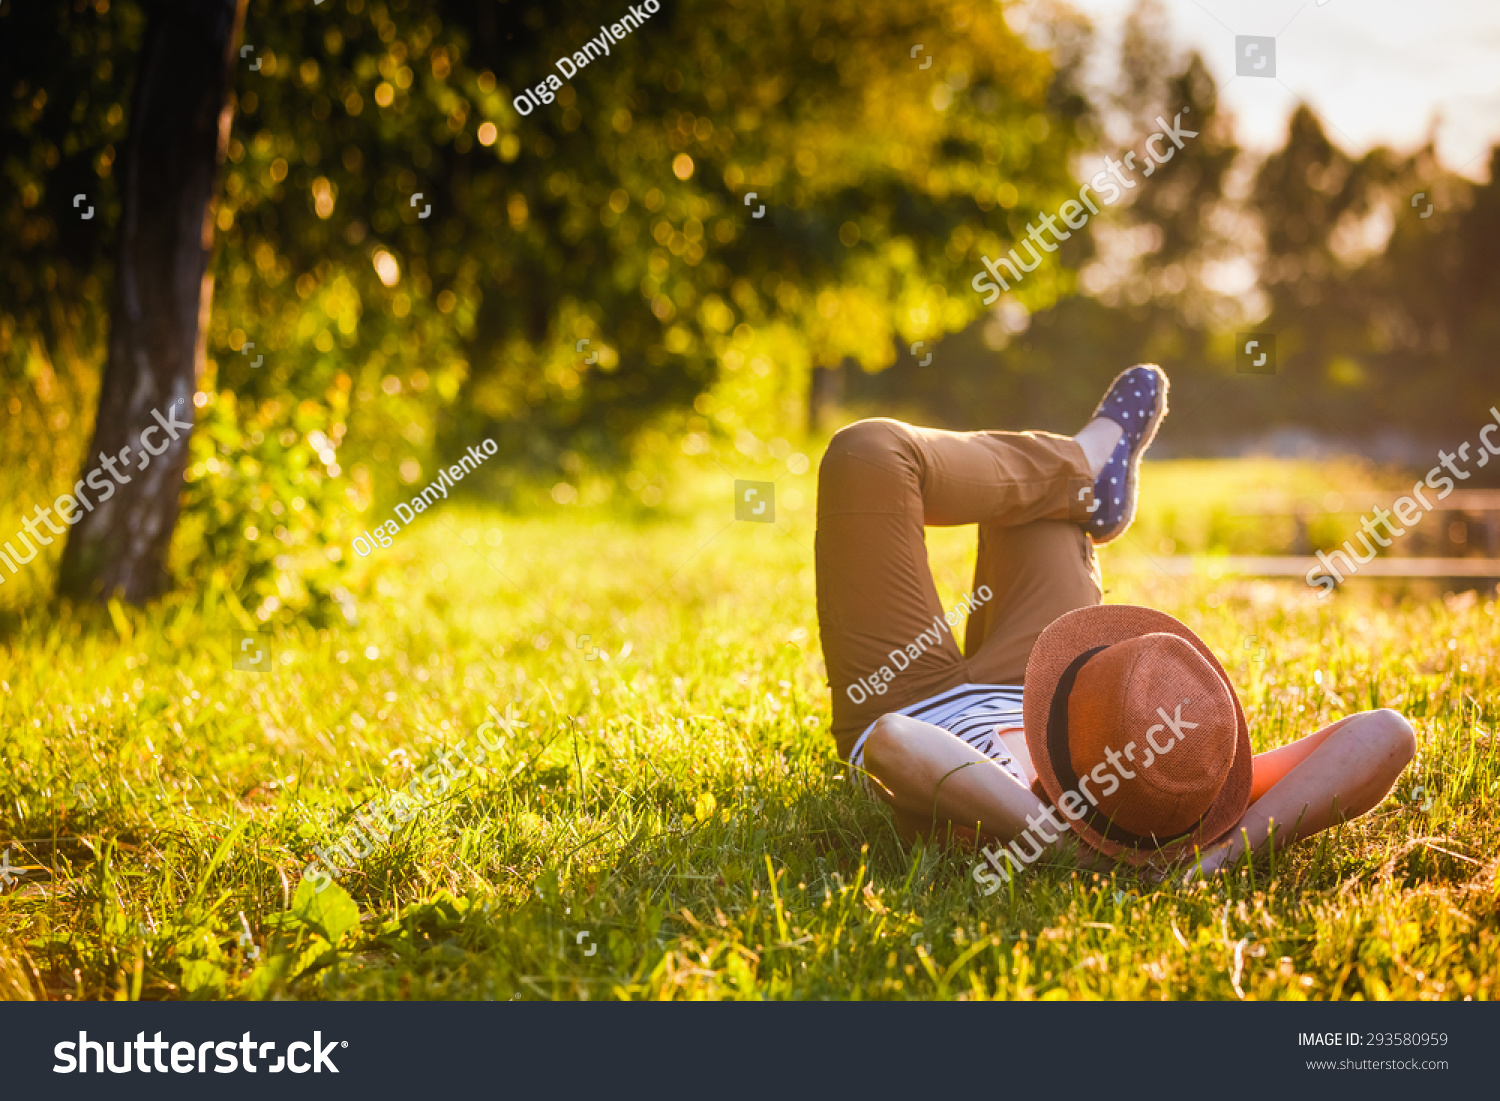 Trendy Hipster Girl Relaxing on the Grass #293580959